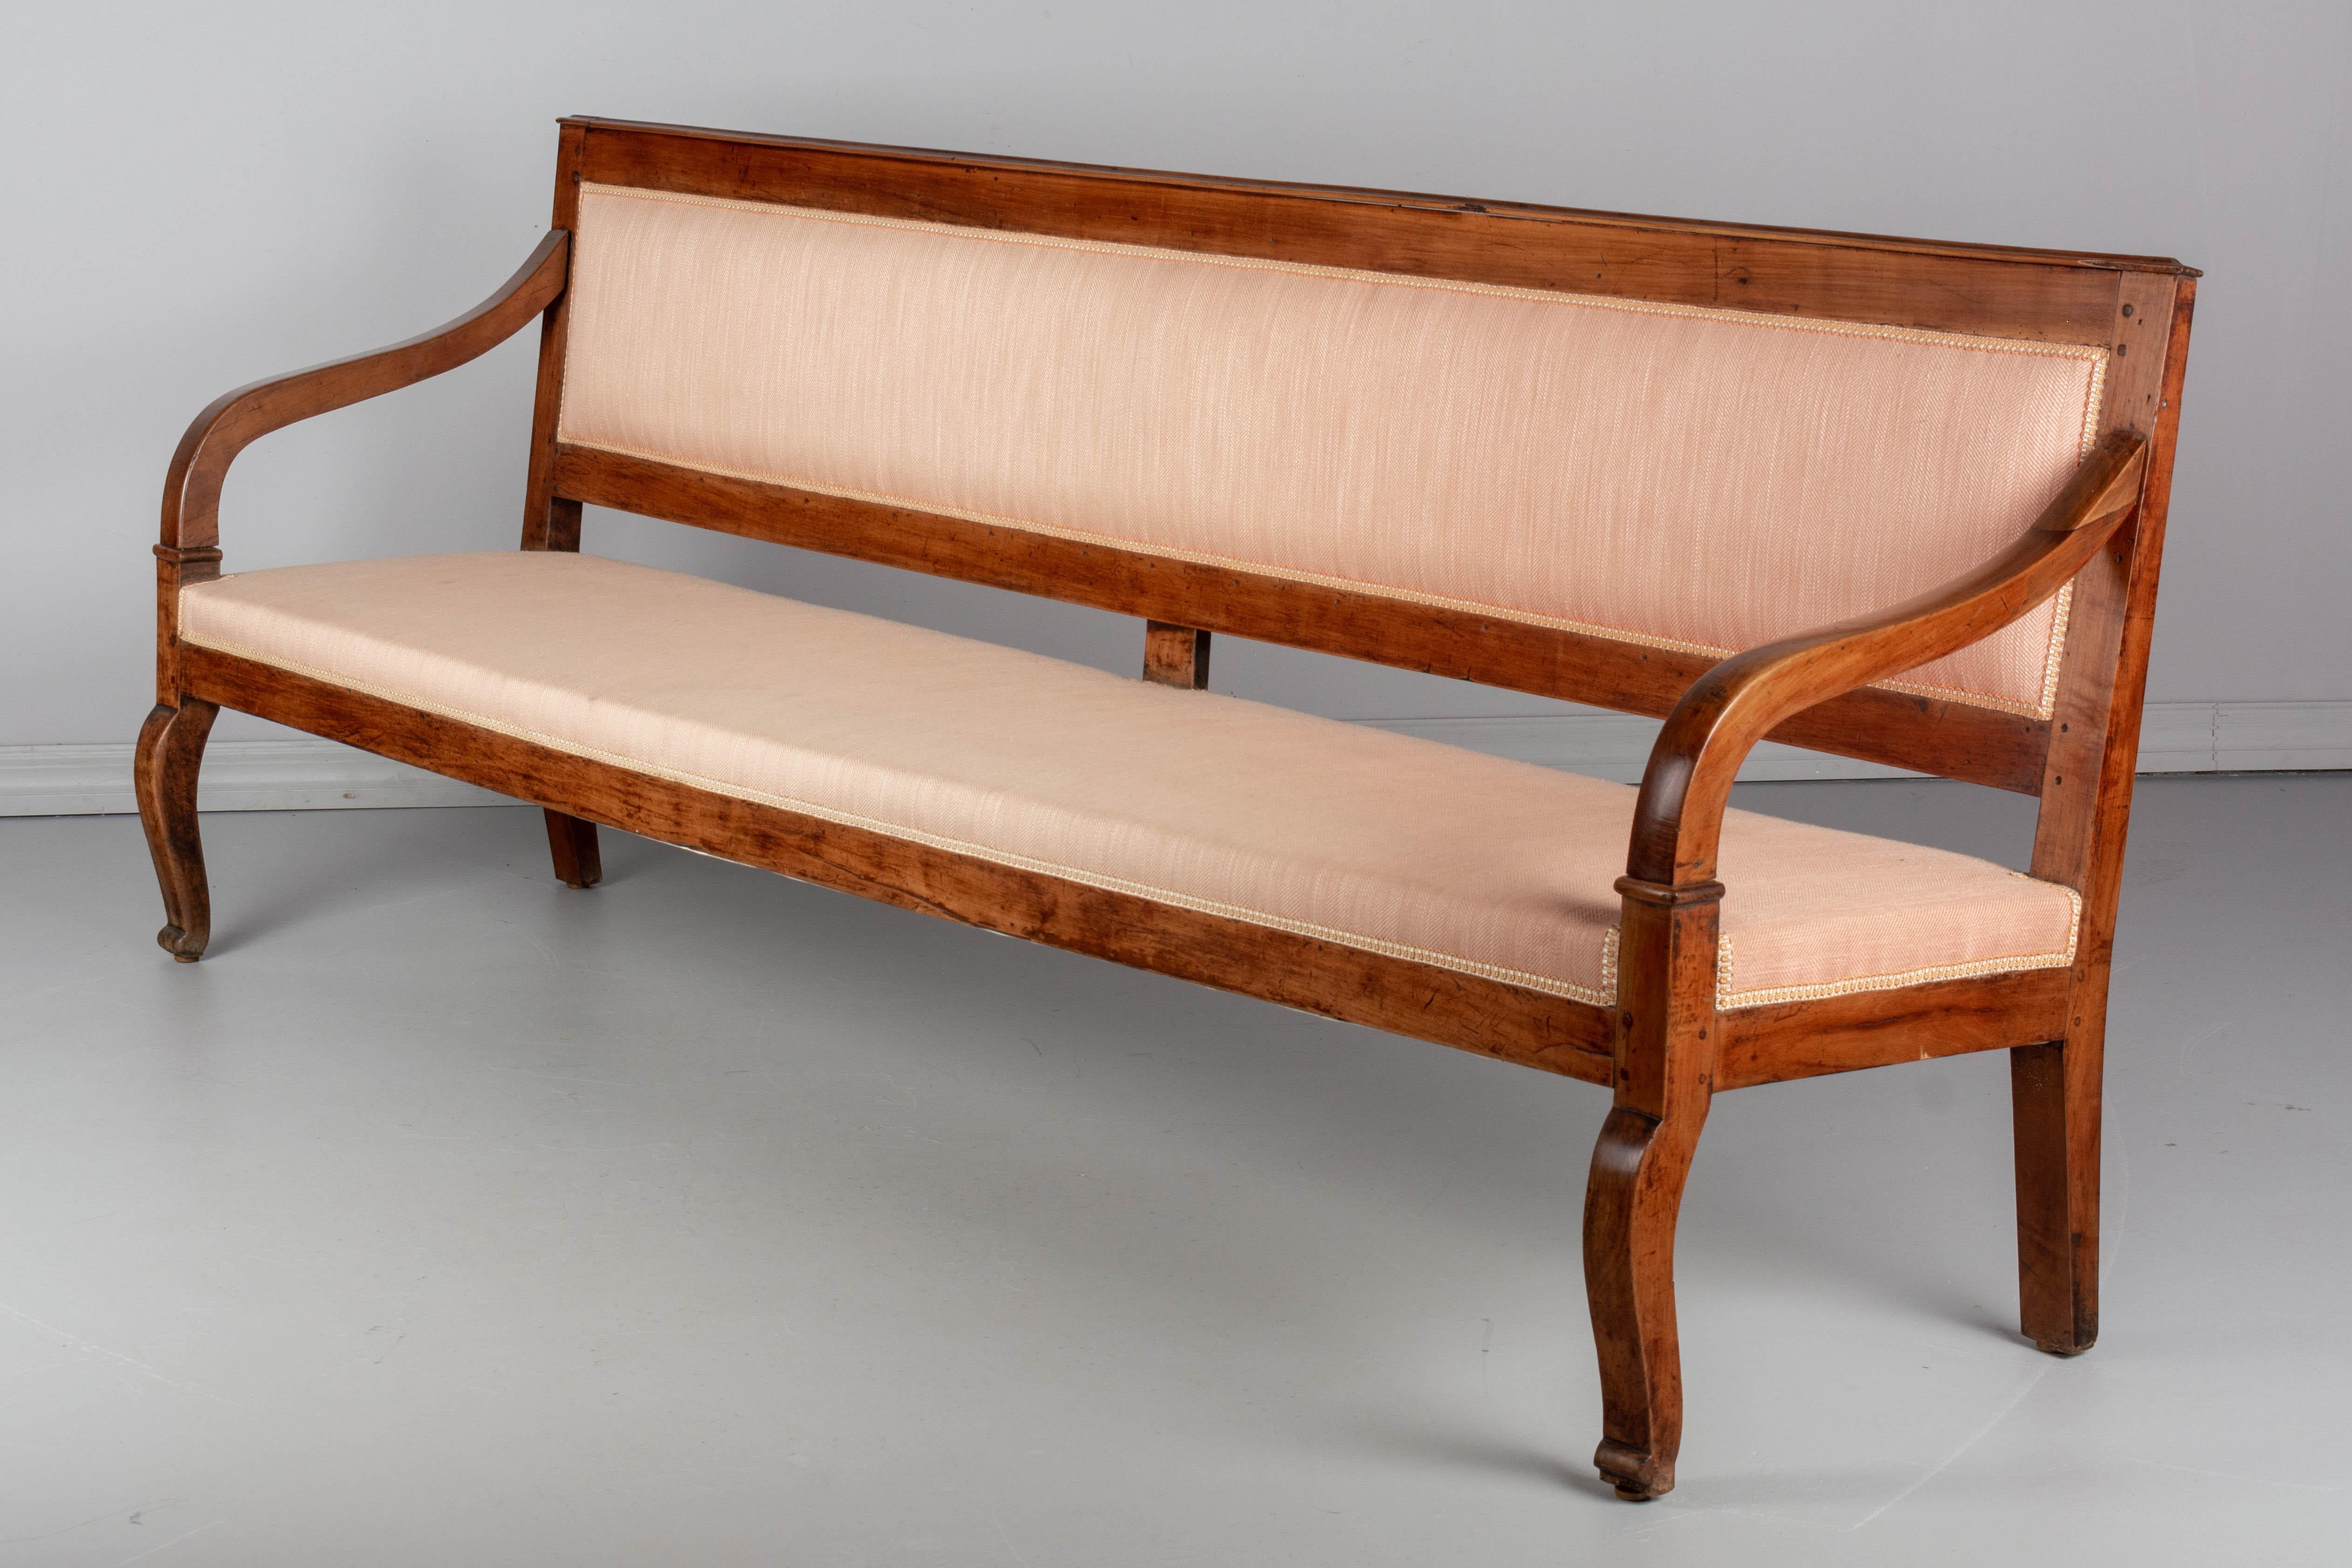 A 19th century French Restauration style bench or banquette, made of solid cherrywood. Sturdy and well-crafted using pegged construction. Old upholstery, as found, is serviceable. An unusually long size, perfect for an entry hall. One of the arms